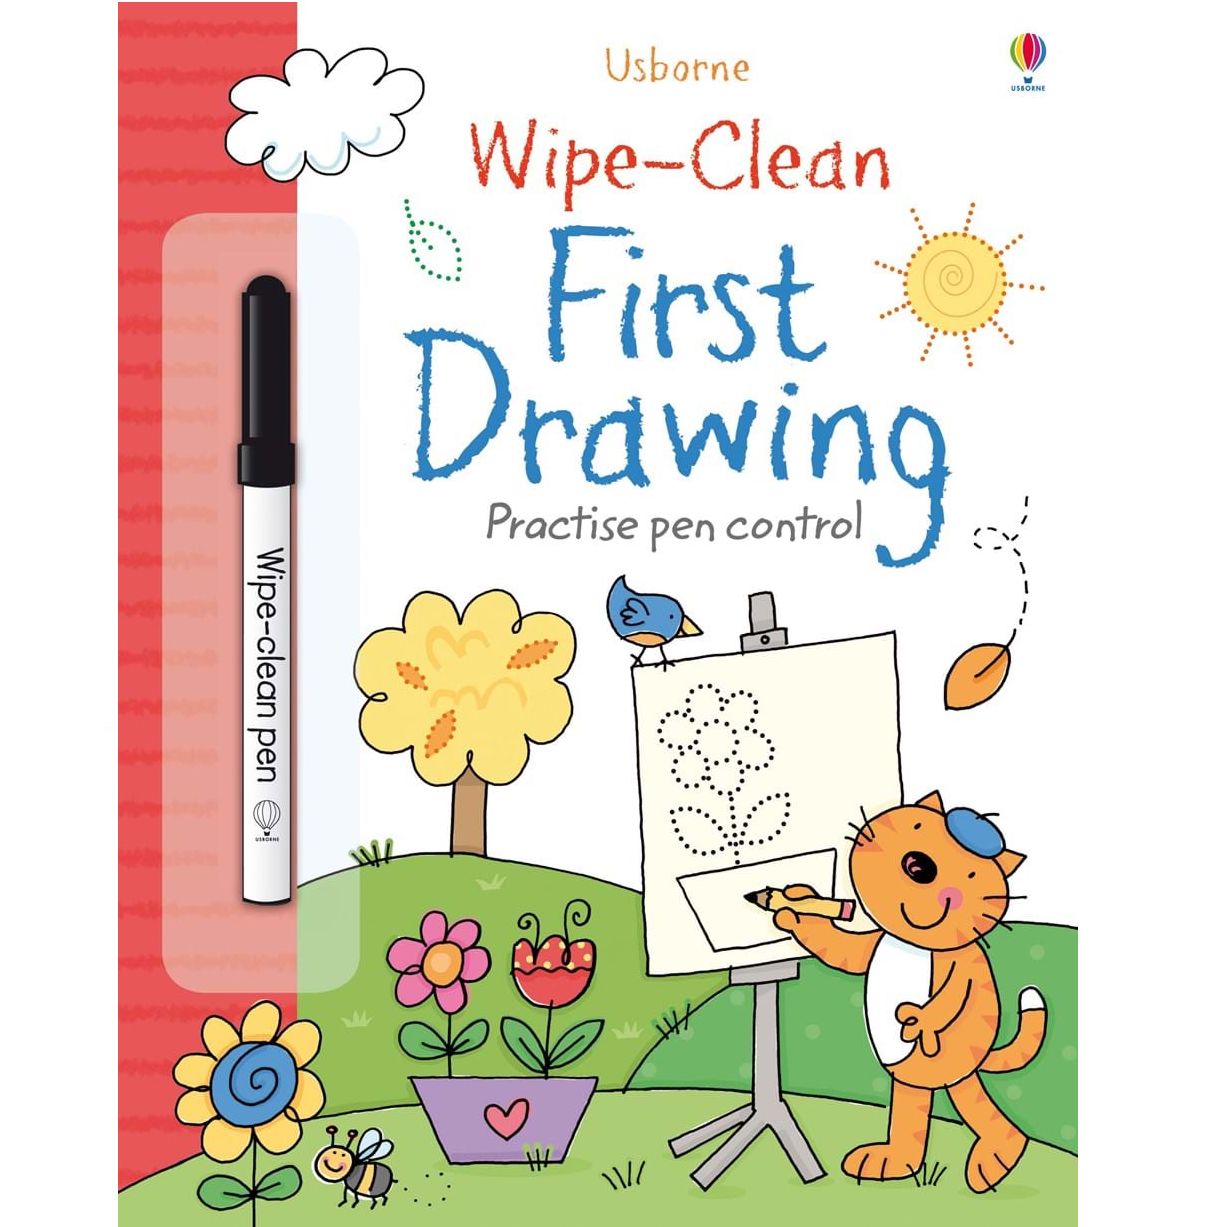 >USBORNE Wipe-Clean First Drawing (4Y&Up) 978-0-7945-2823-2